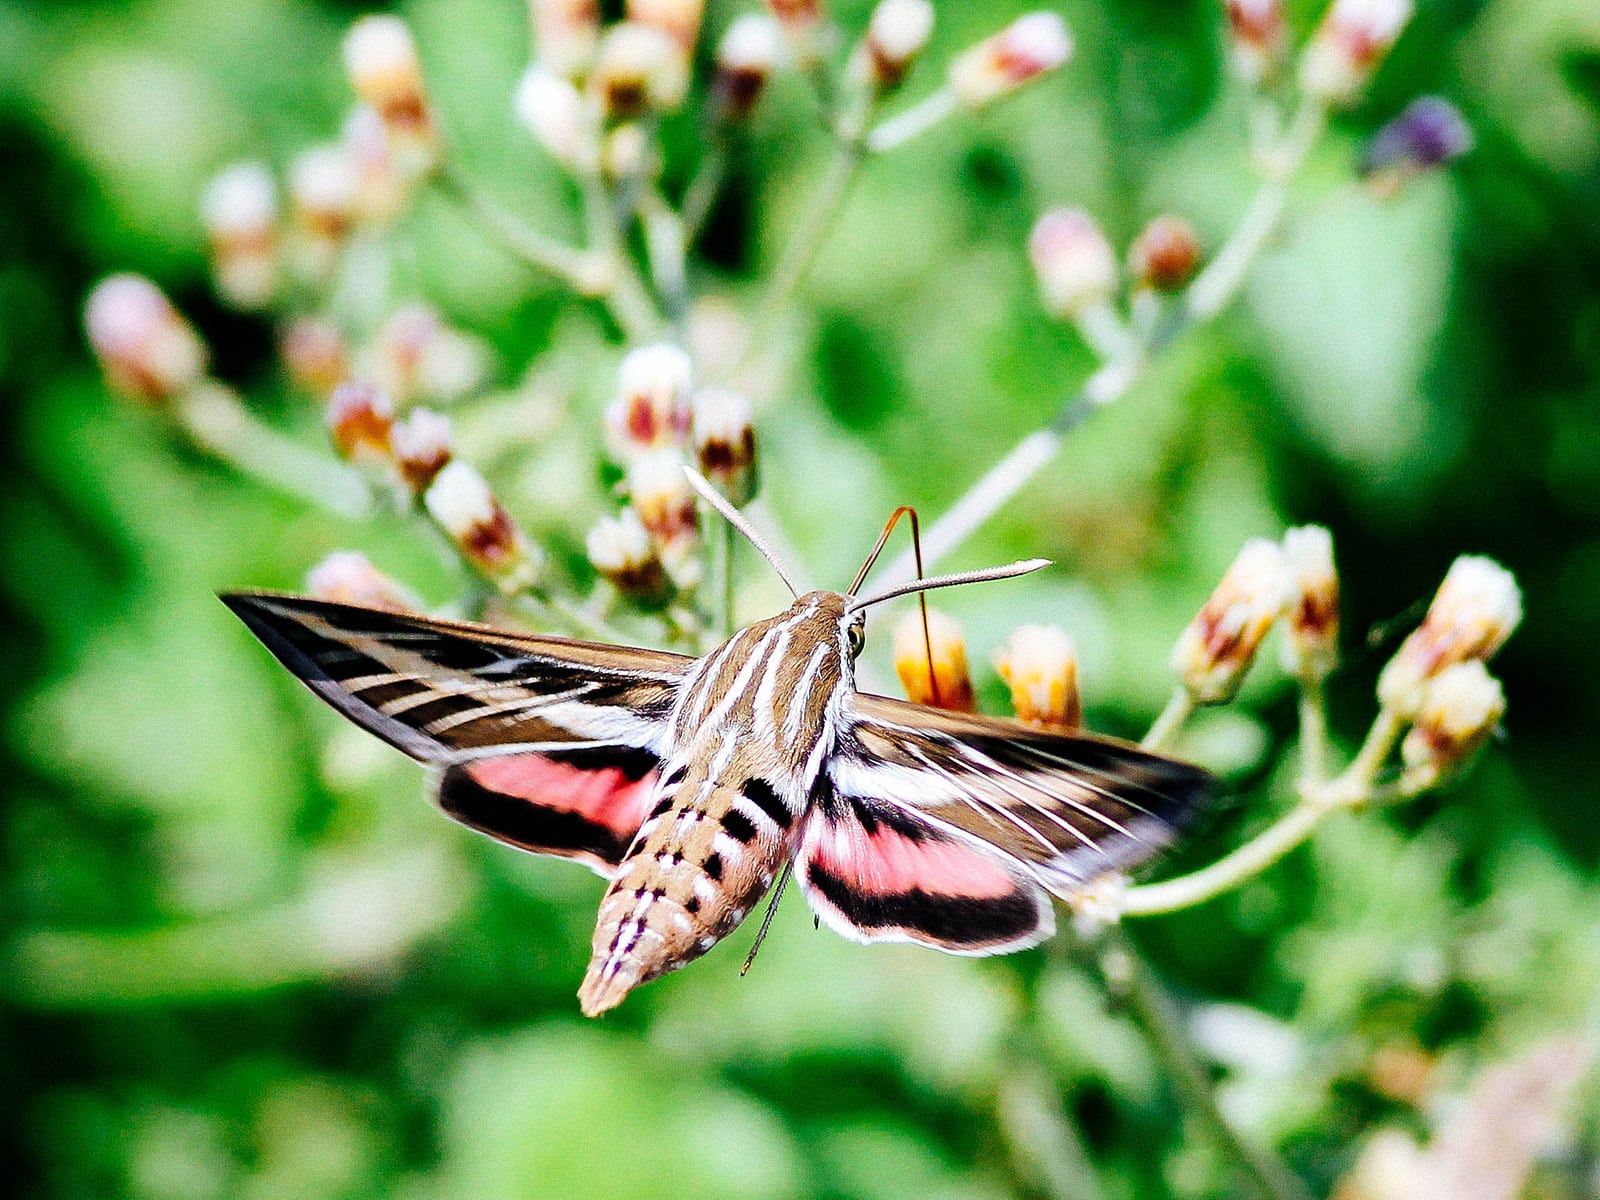 White-lined sphinx moth hovering over a cluster of flowers